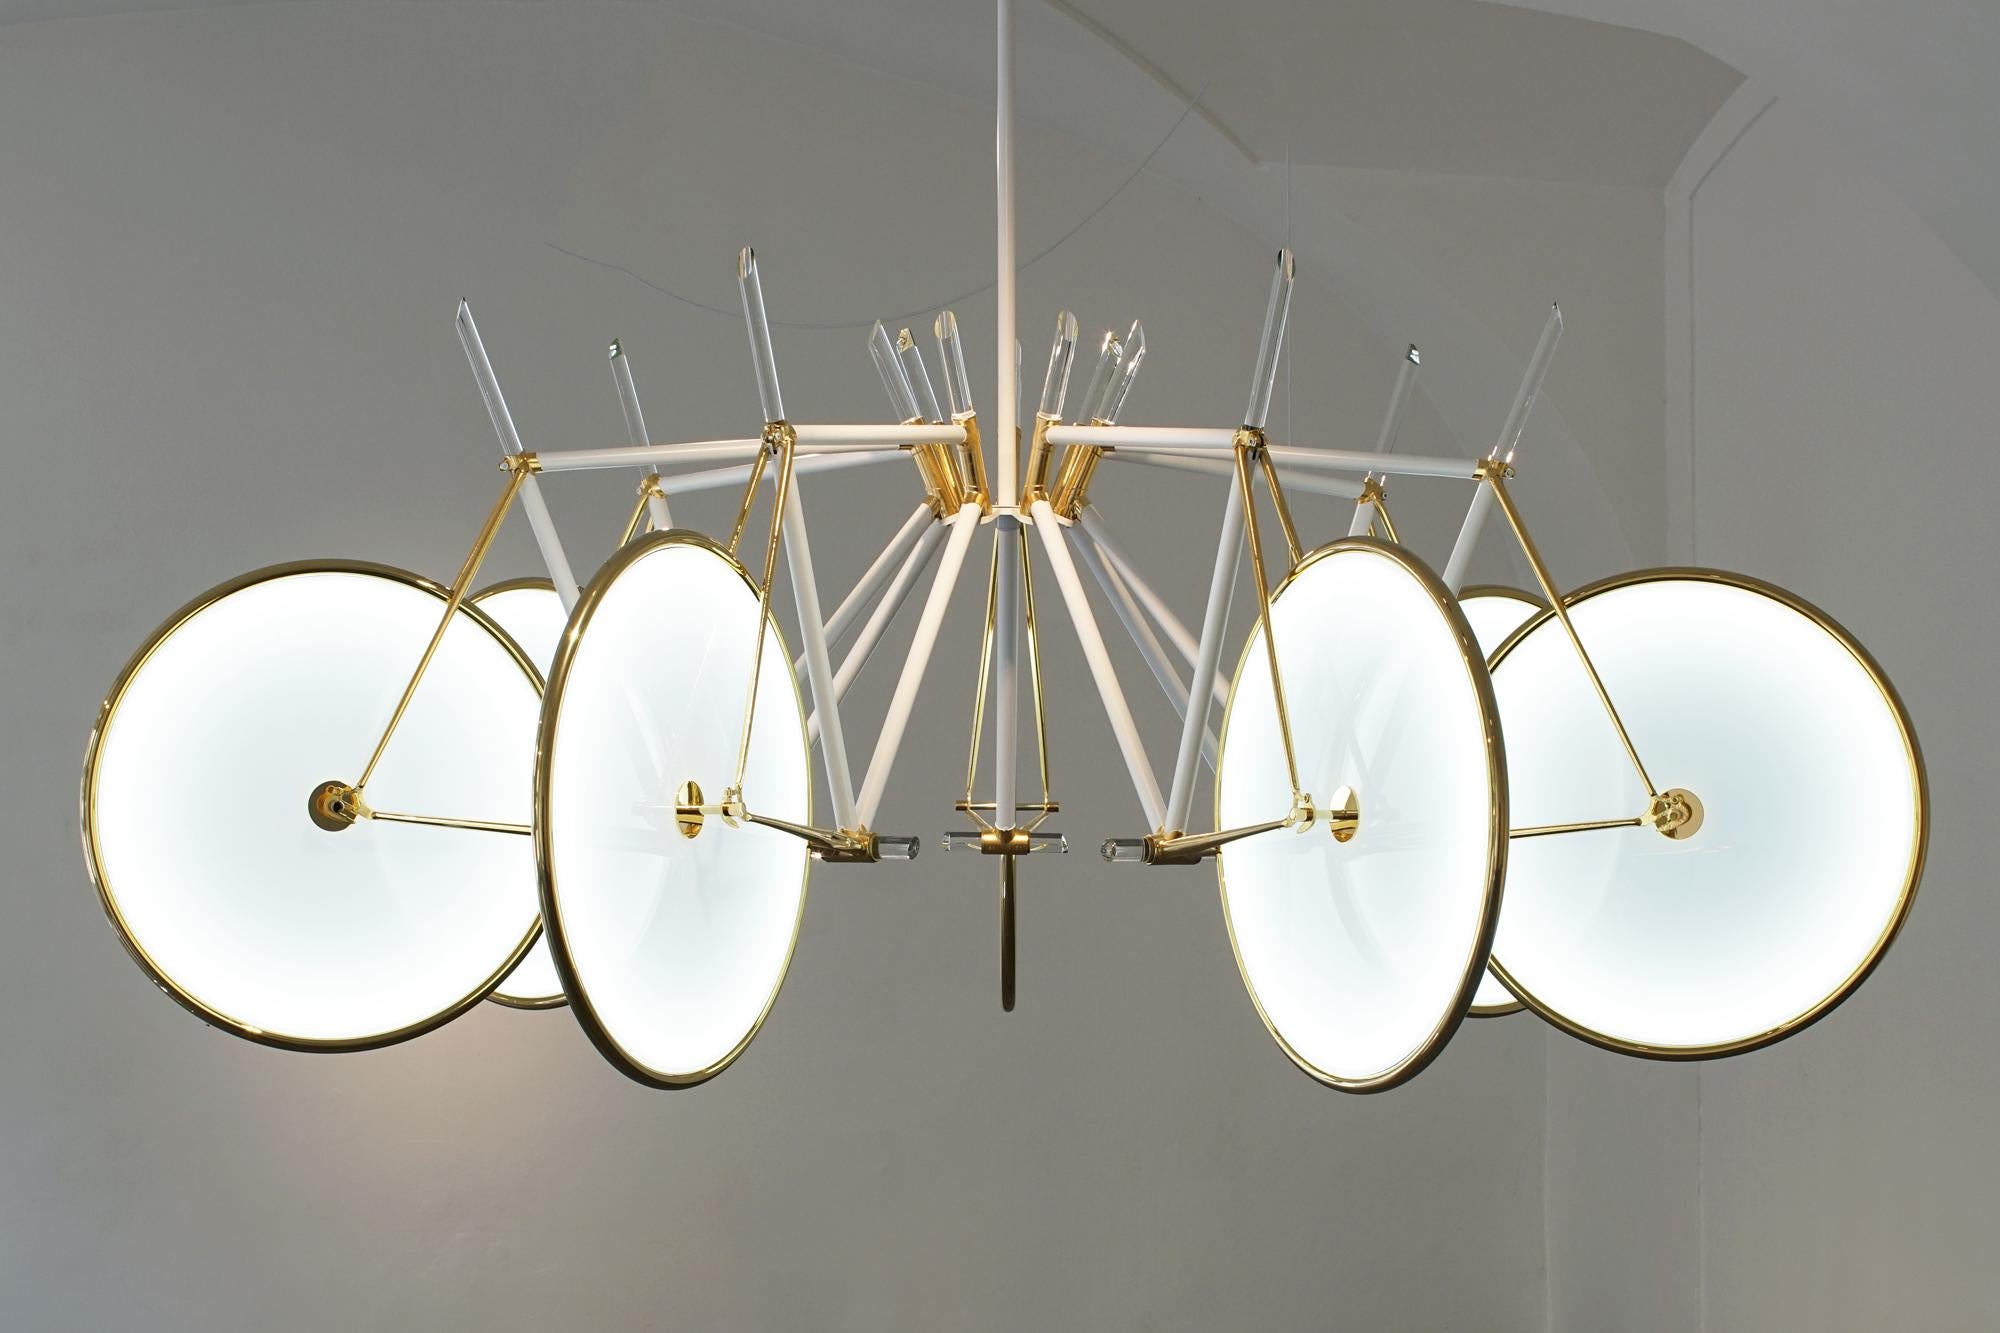 Armstrong chandelier by HG Atelier
Dimensions: D 260 x H 162 cm
Materials: White / black version with gold 24 karat

HG Atelier Design focuses on design and production of lights and lighted objects. We specialize in developing new lighting